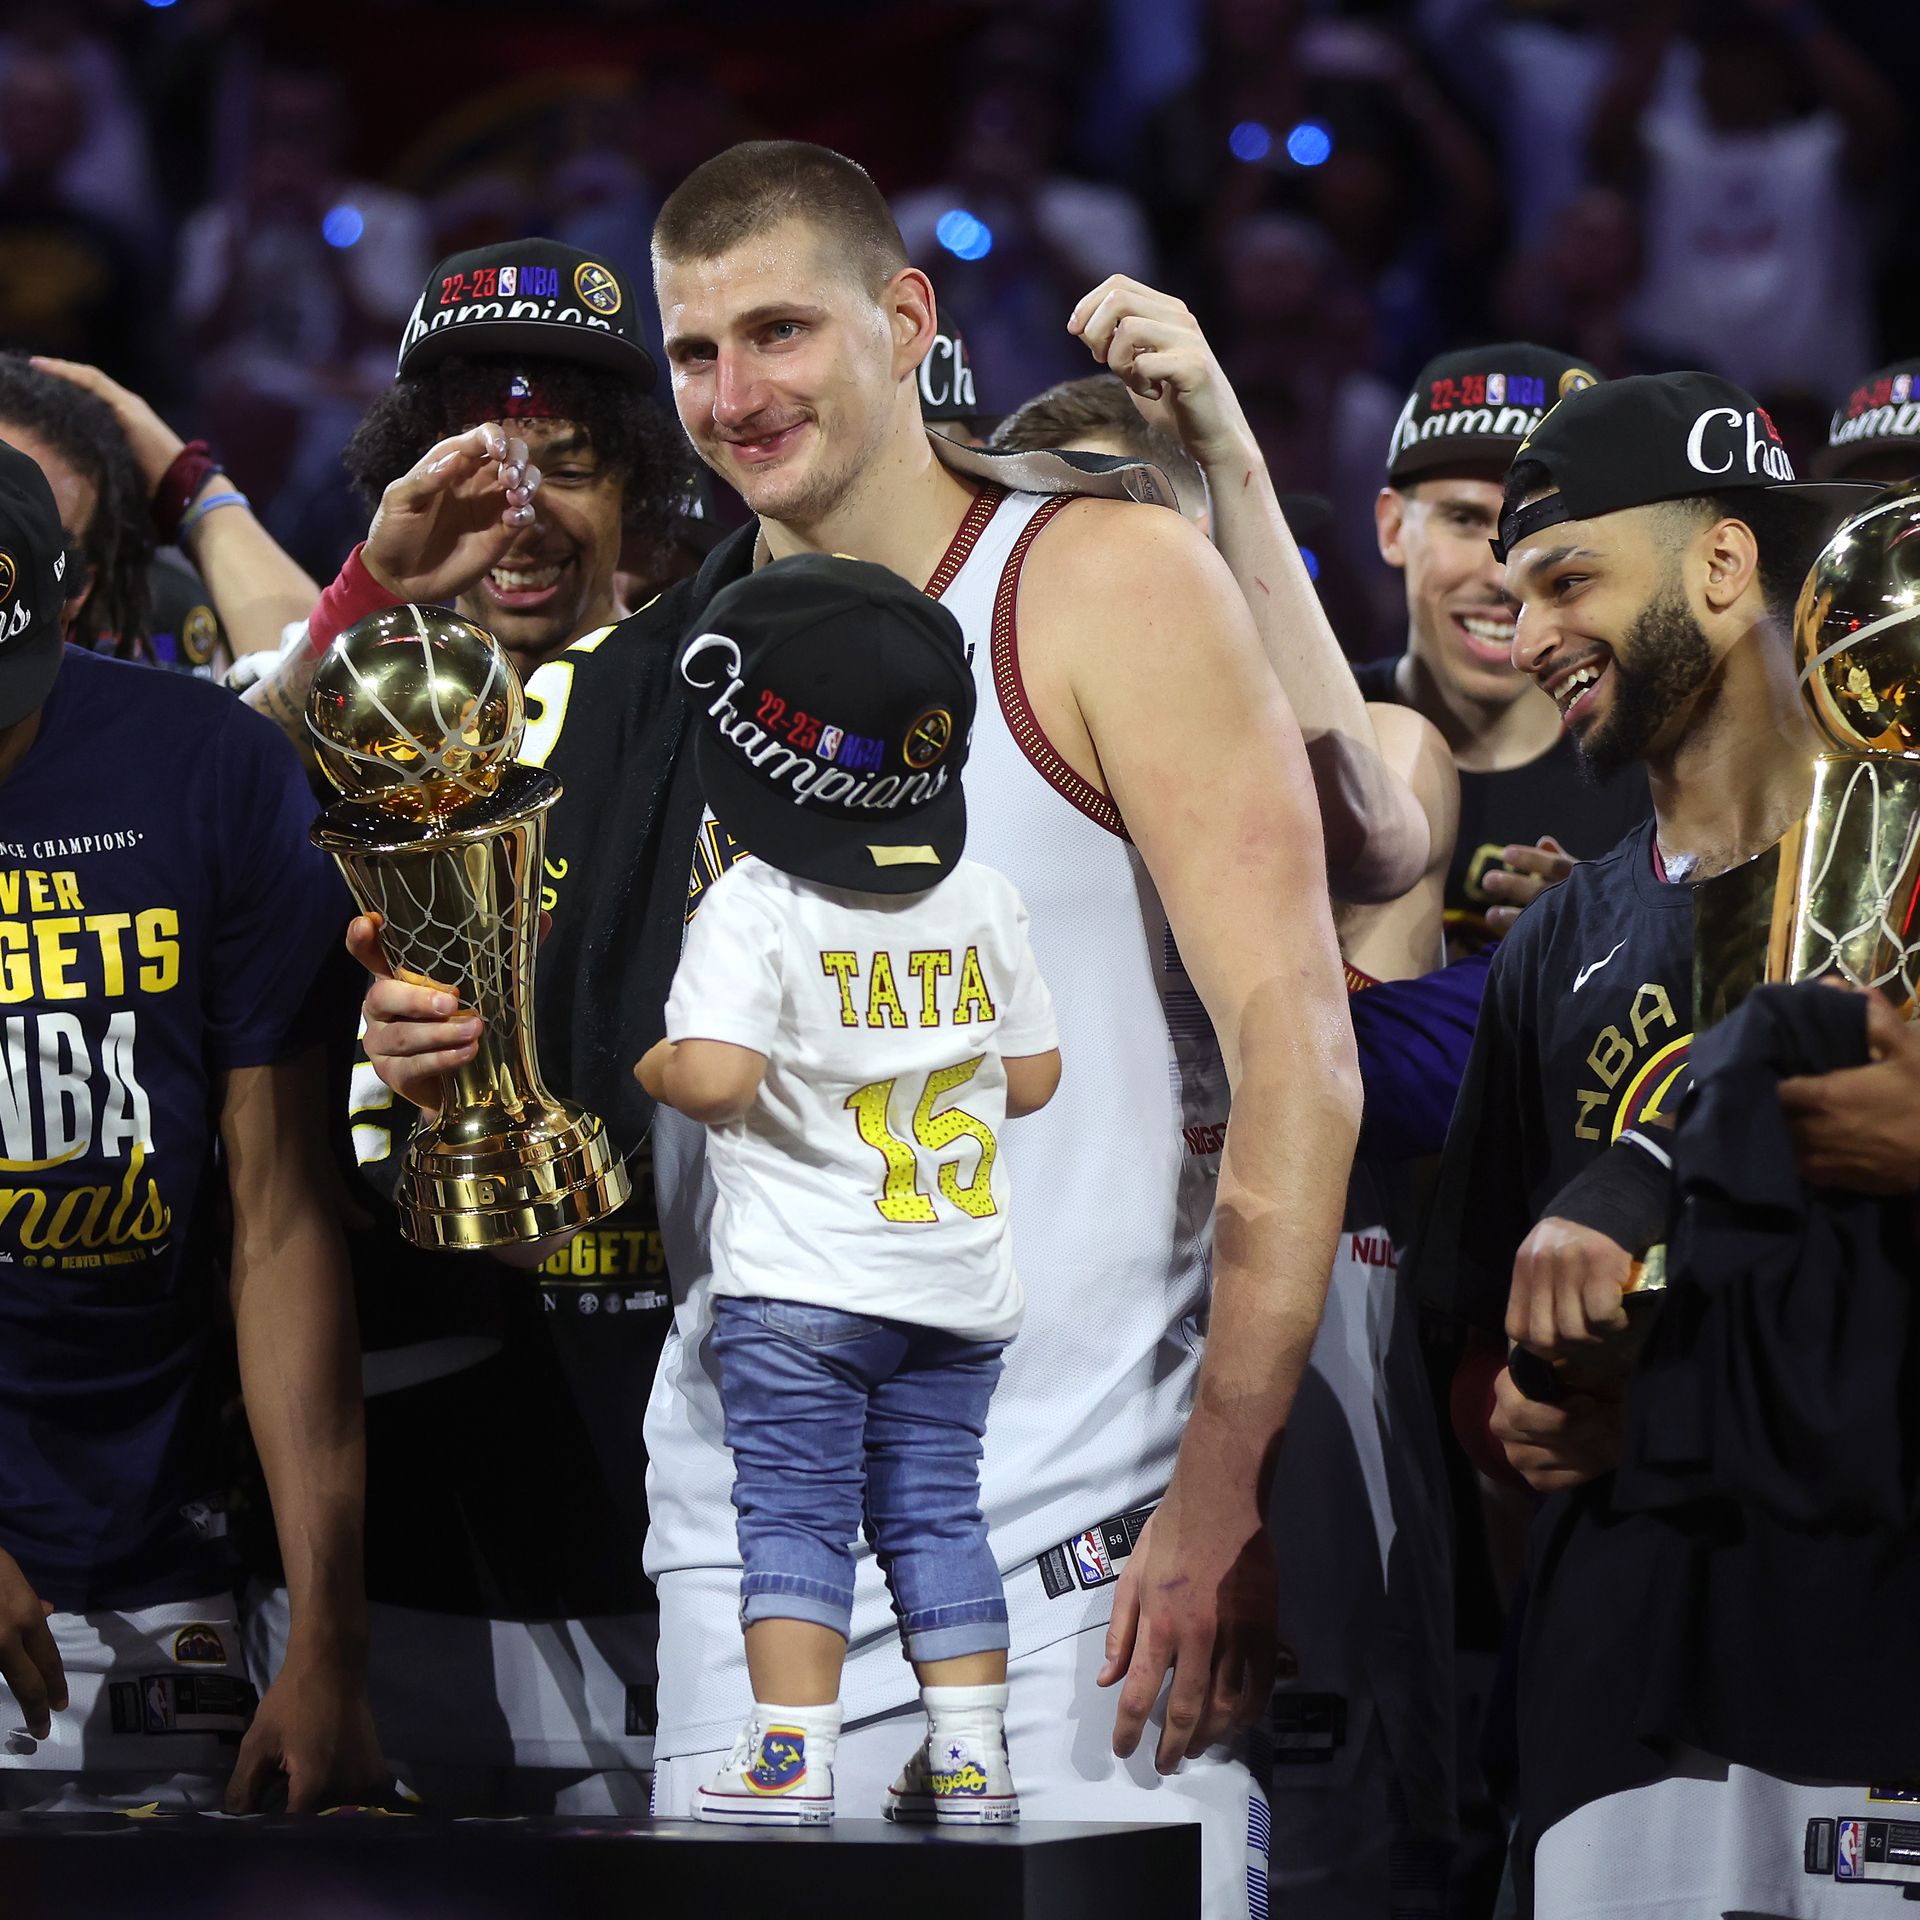 Why Nikola Jokic is a Top 20 player in NBA history